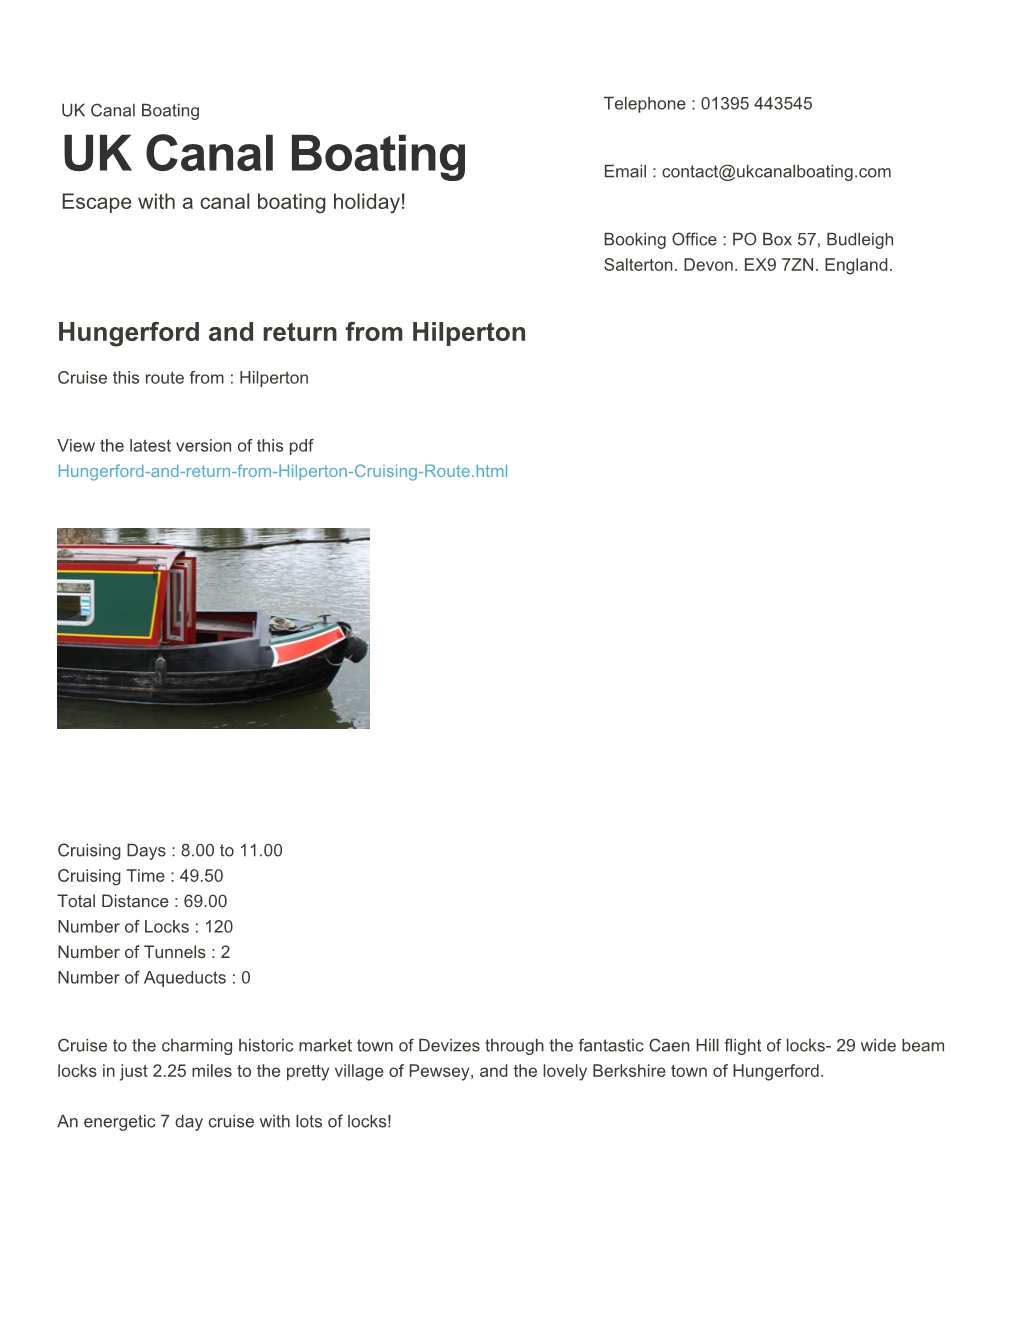 Hungerford and Return from Hilperton | UK Canal Boating